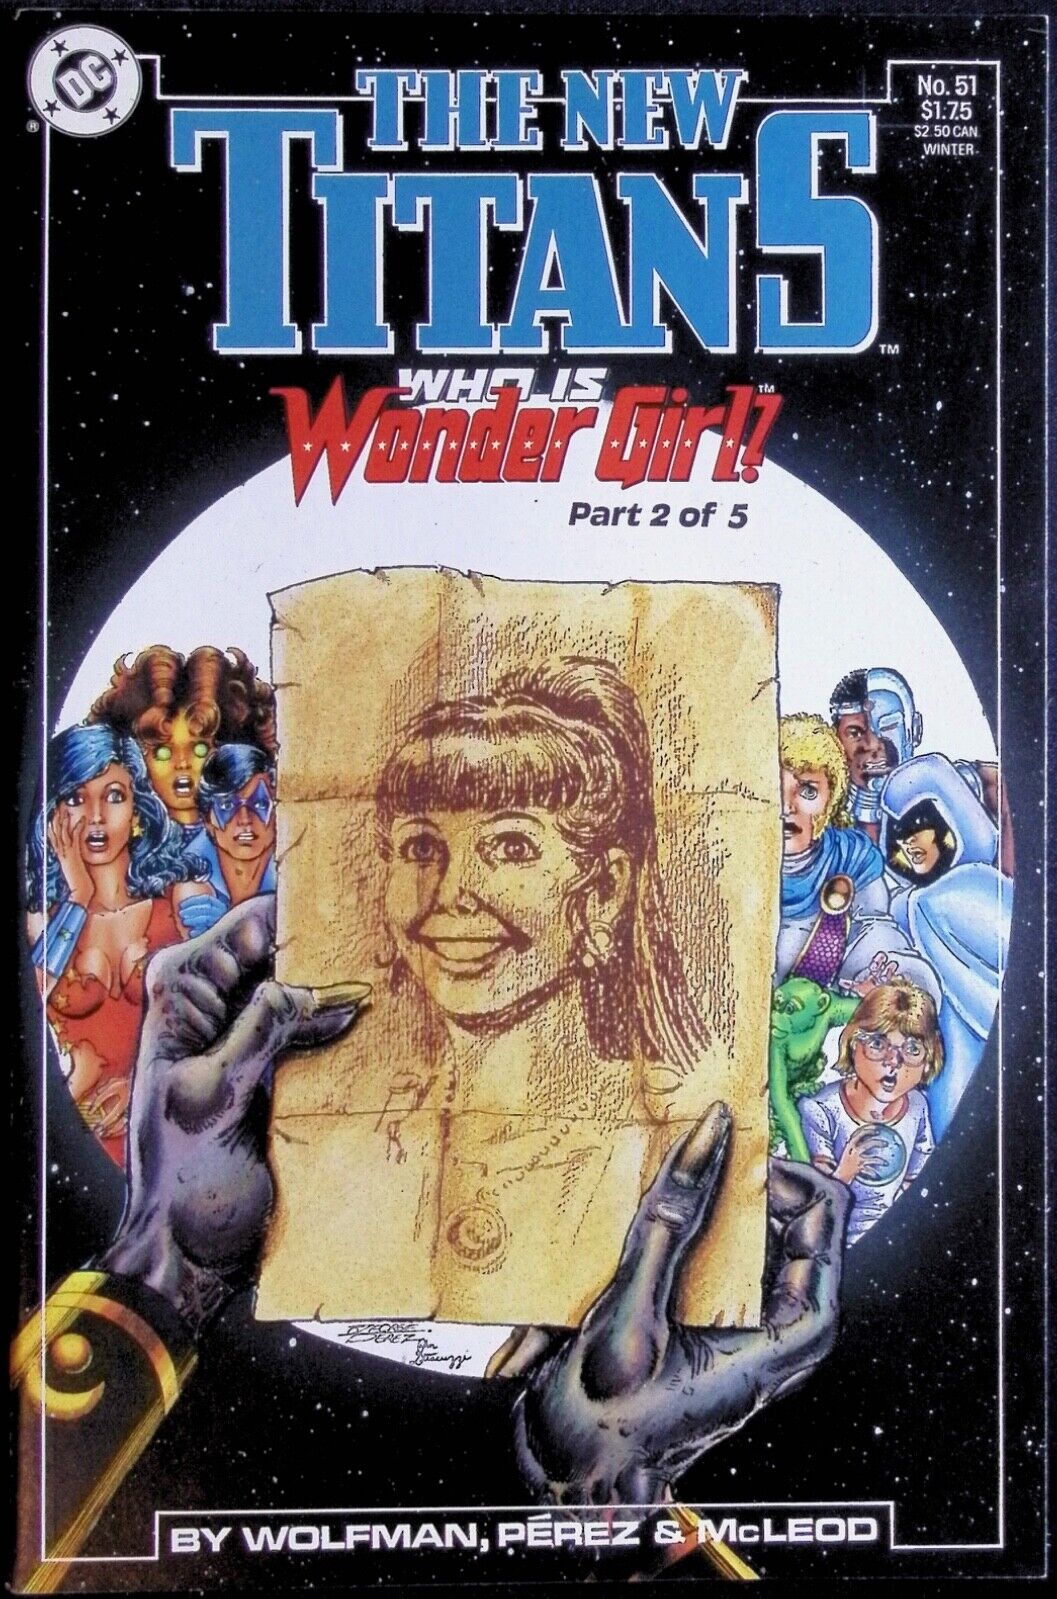 NEW TEEN TITANS Comic Issue 51 -- Wolfman/Perez Wonder Woman -- 1988 DC VF+ Con